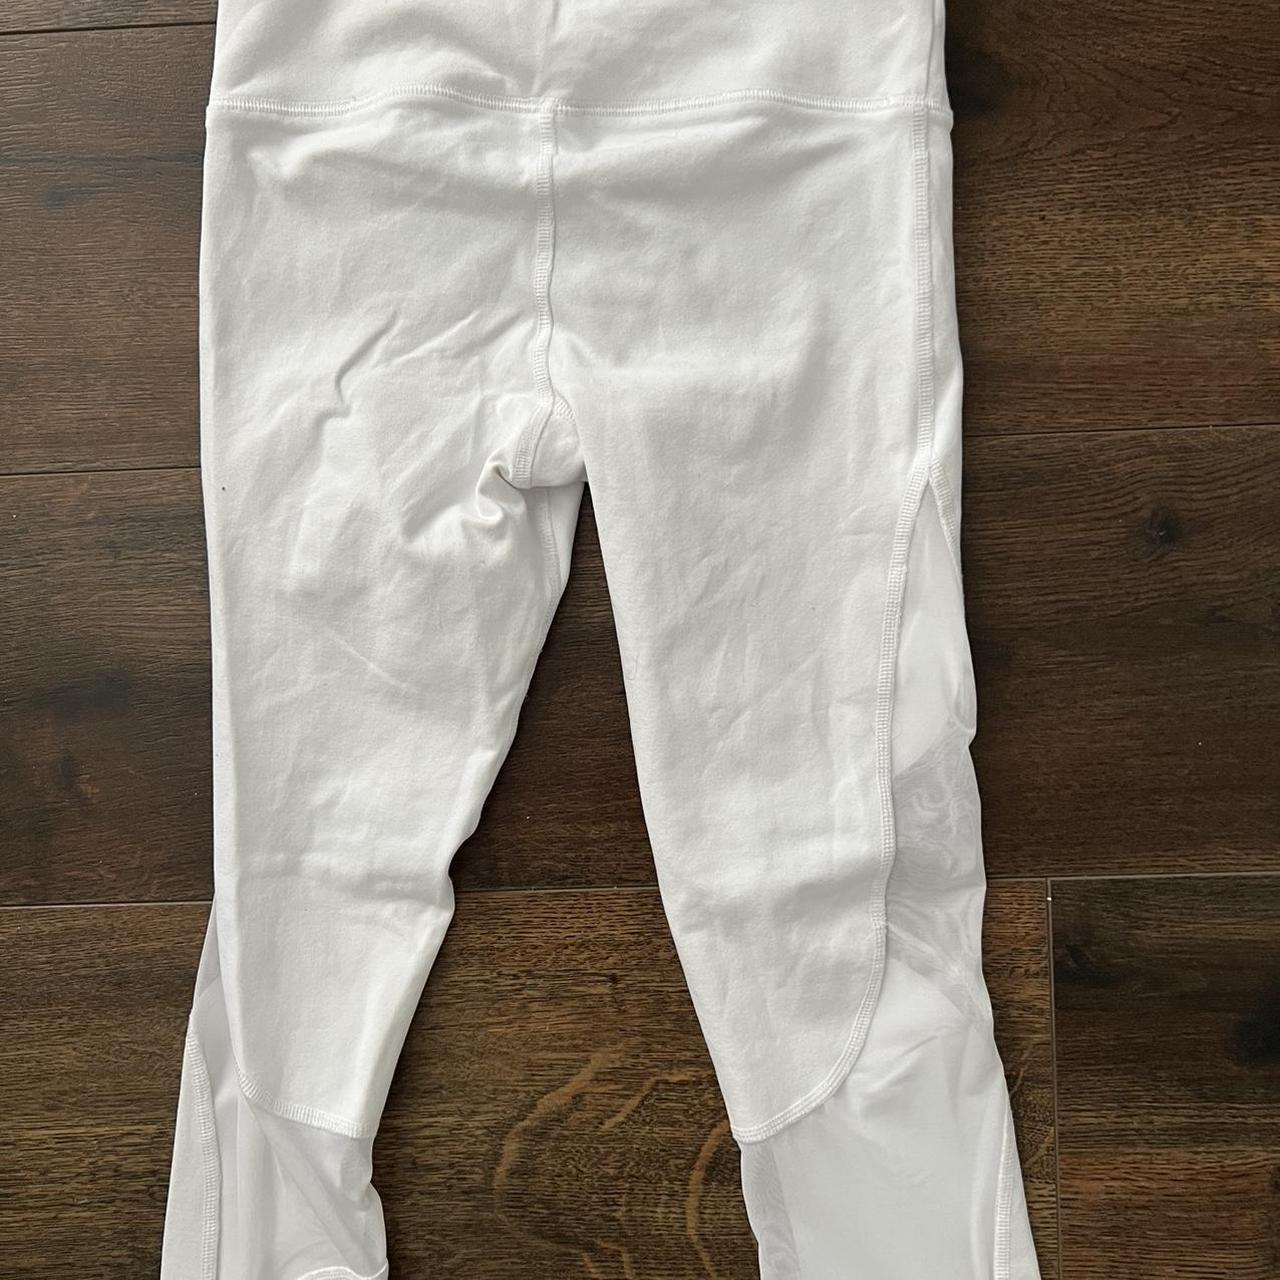 White Alo yoga pants that are oh sooo flattering! - Depop